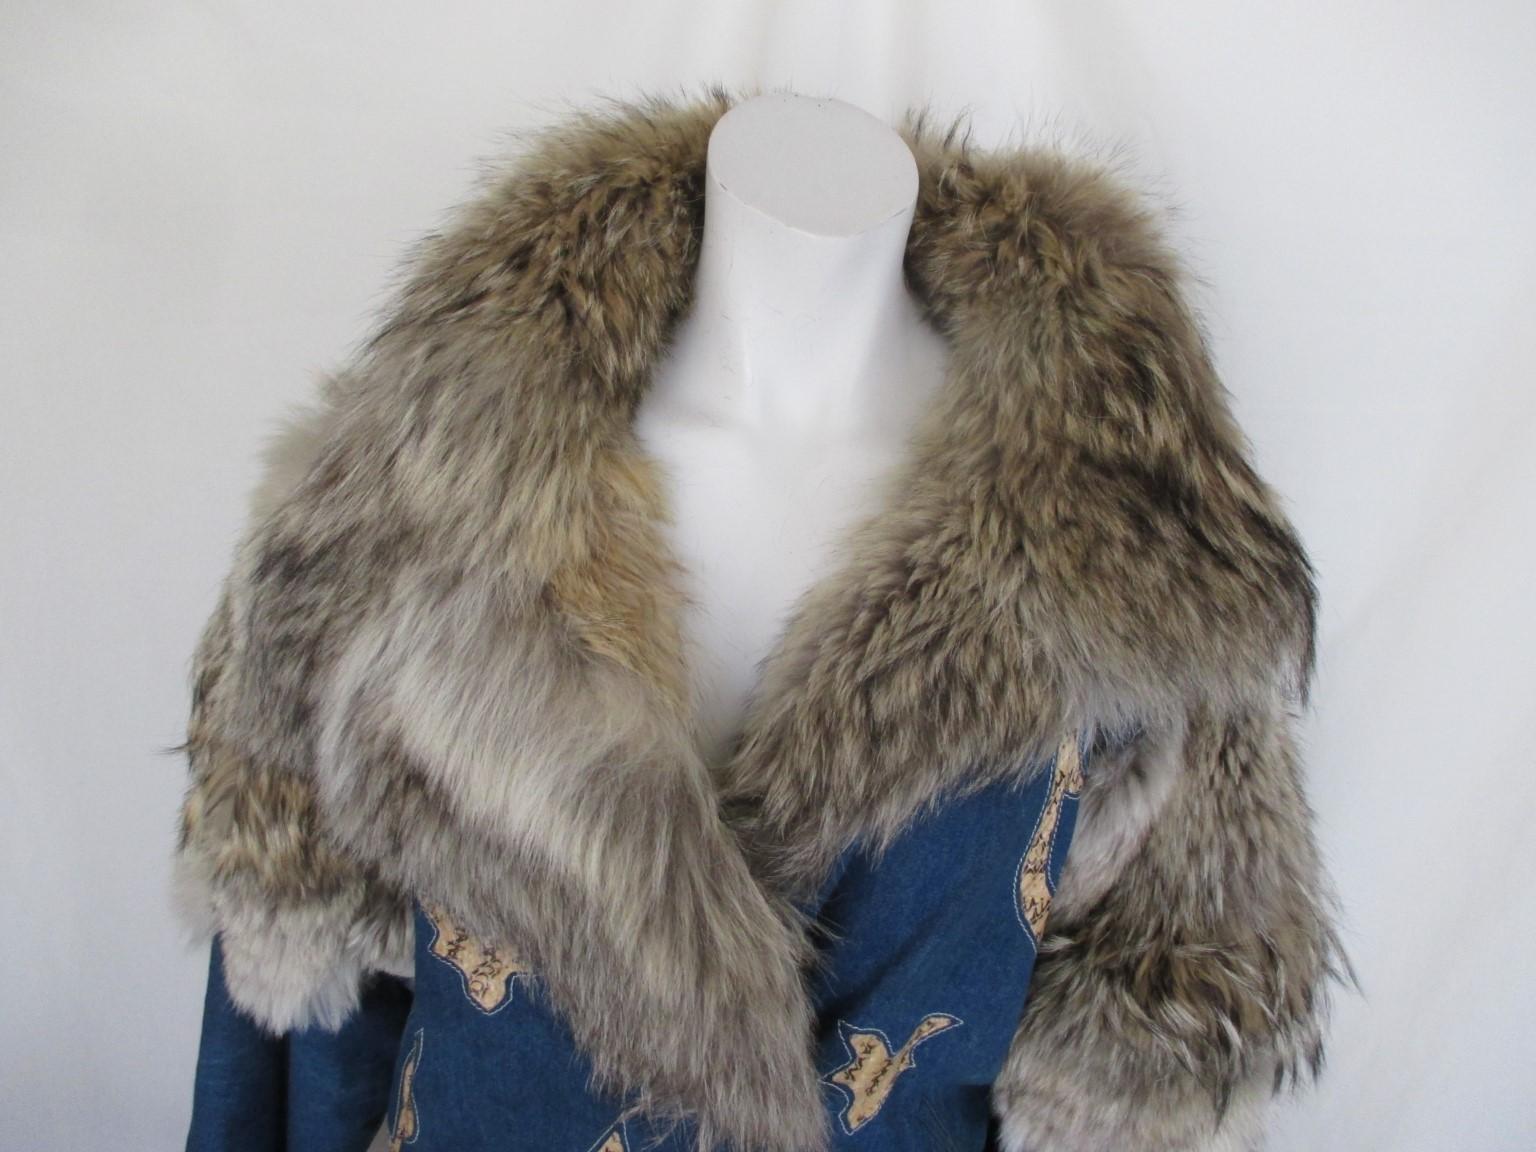 Unique Jacket made from stone washed blue denim, wolf fur and python details.

View our front store, we offer more luxurious vintage items

Details:
With 2 side pockets and 4 press buttons.
Customized by Jacques Saint Laurent, French designer 
Fully